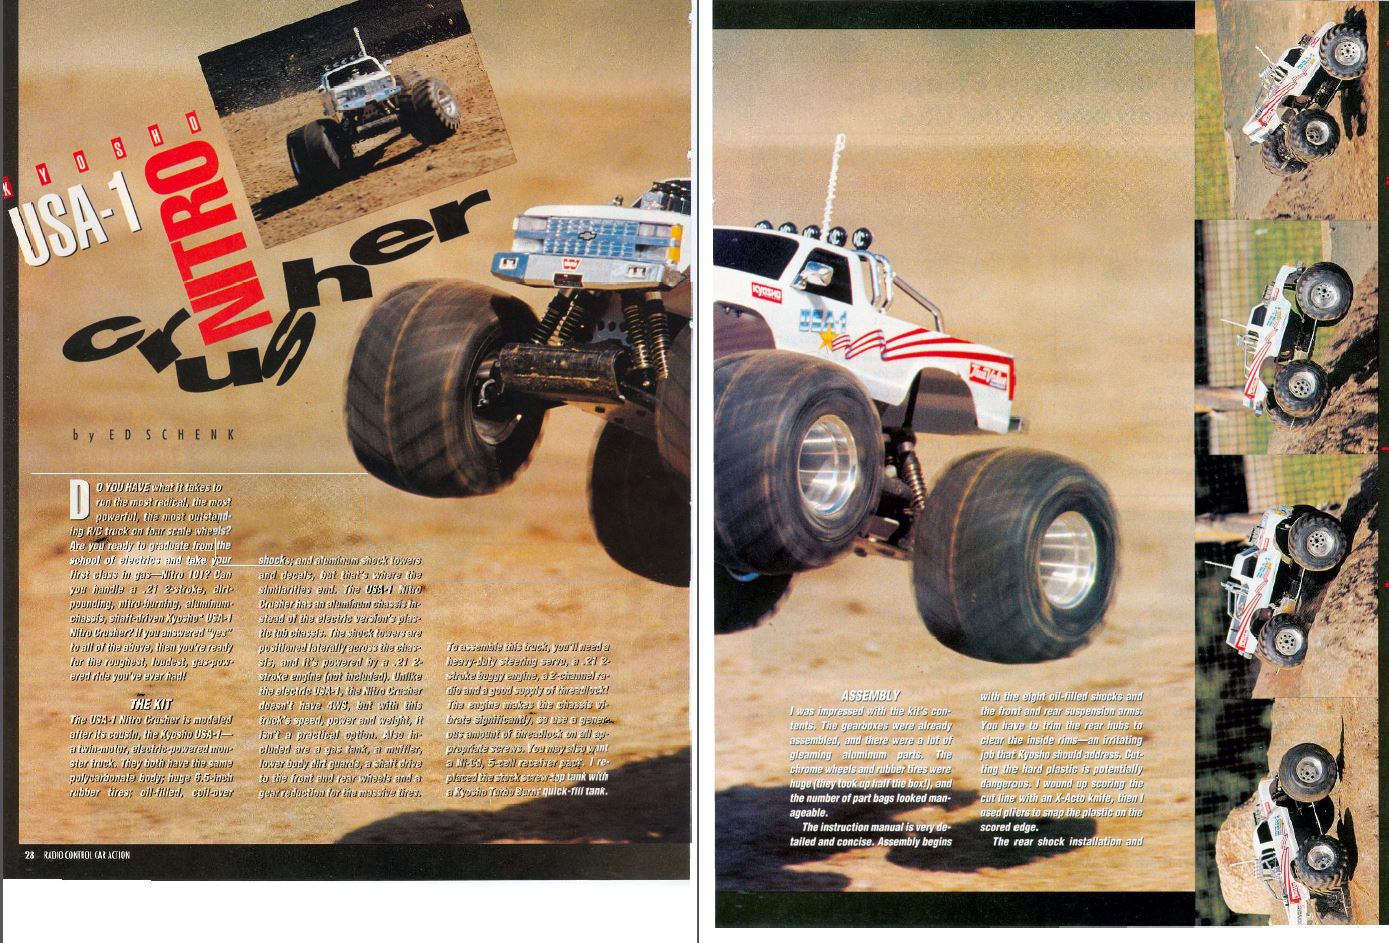 #TBT Kyosho USA-1 Nitro Crusher Monster Truck Covered In March 1992 Issue